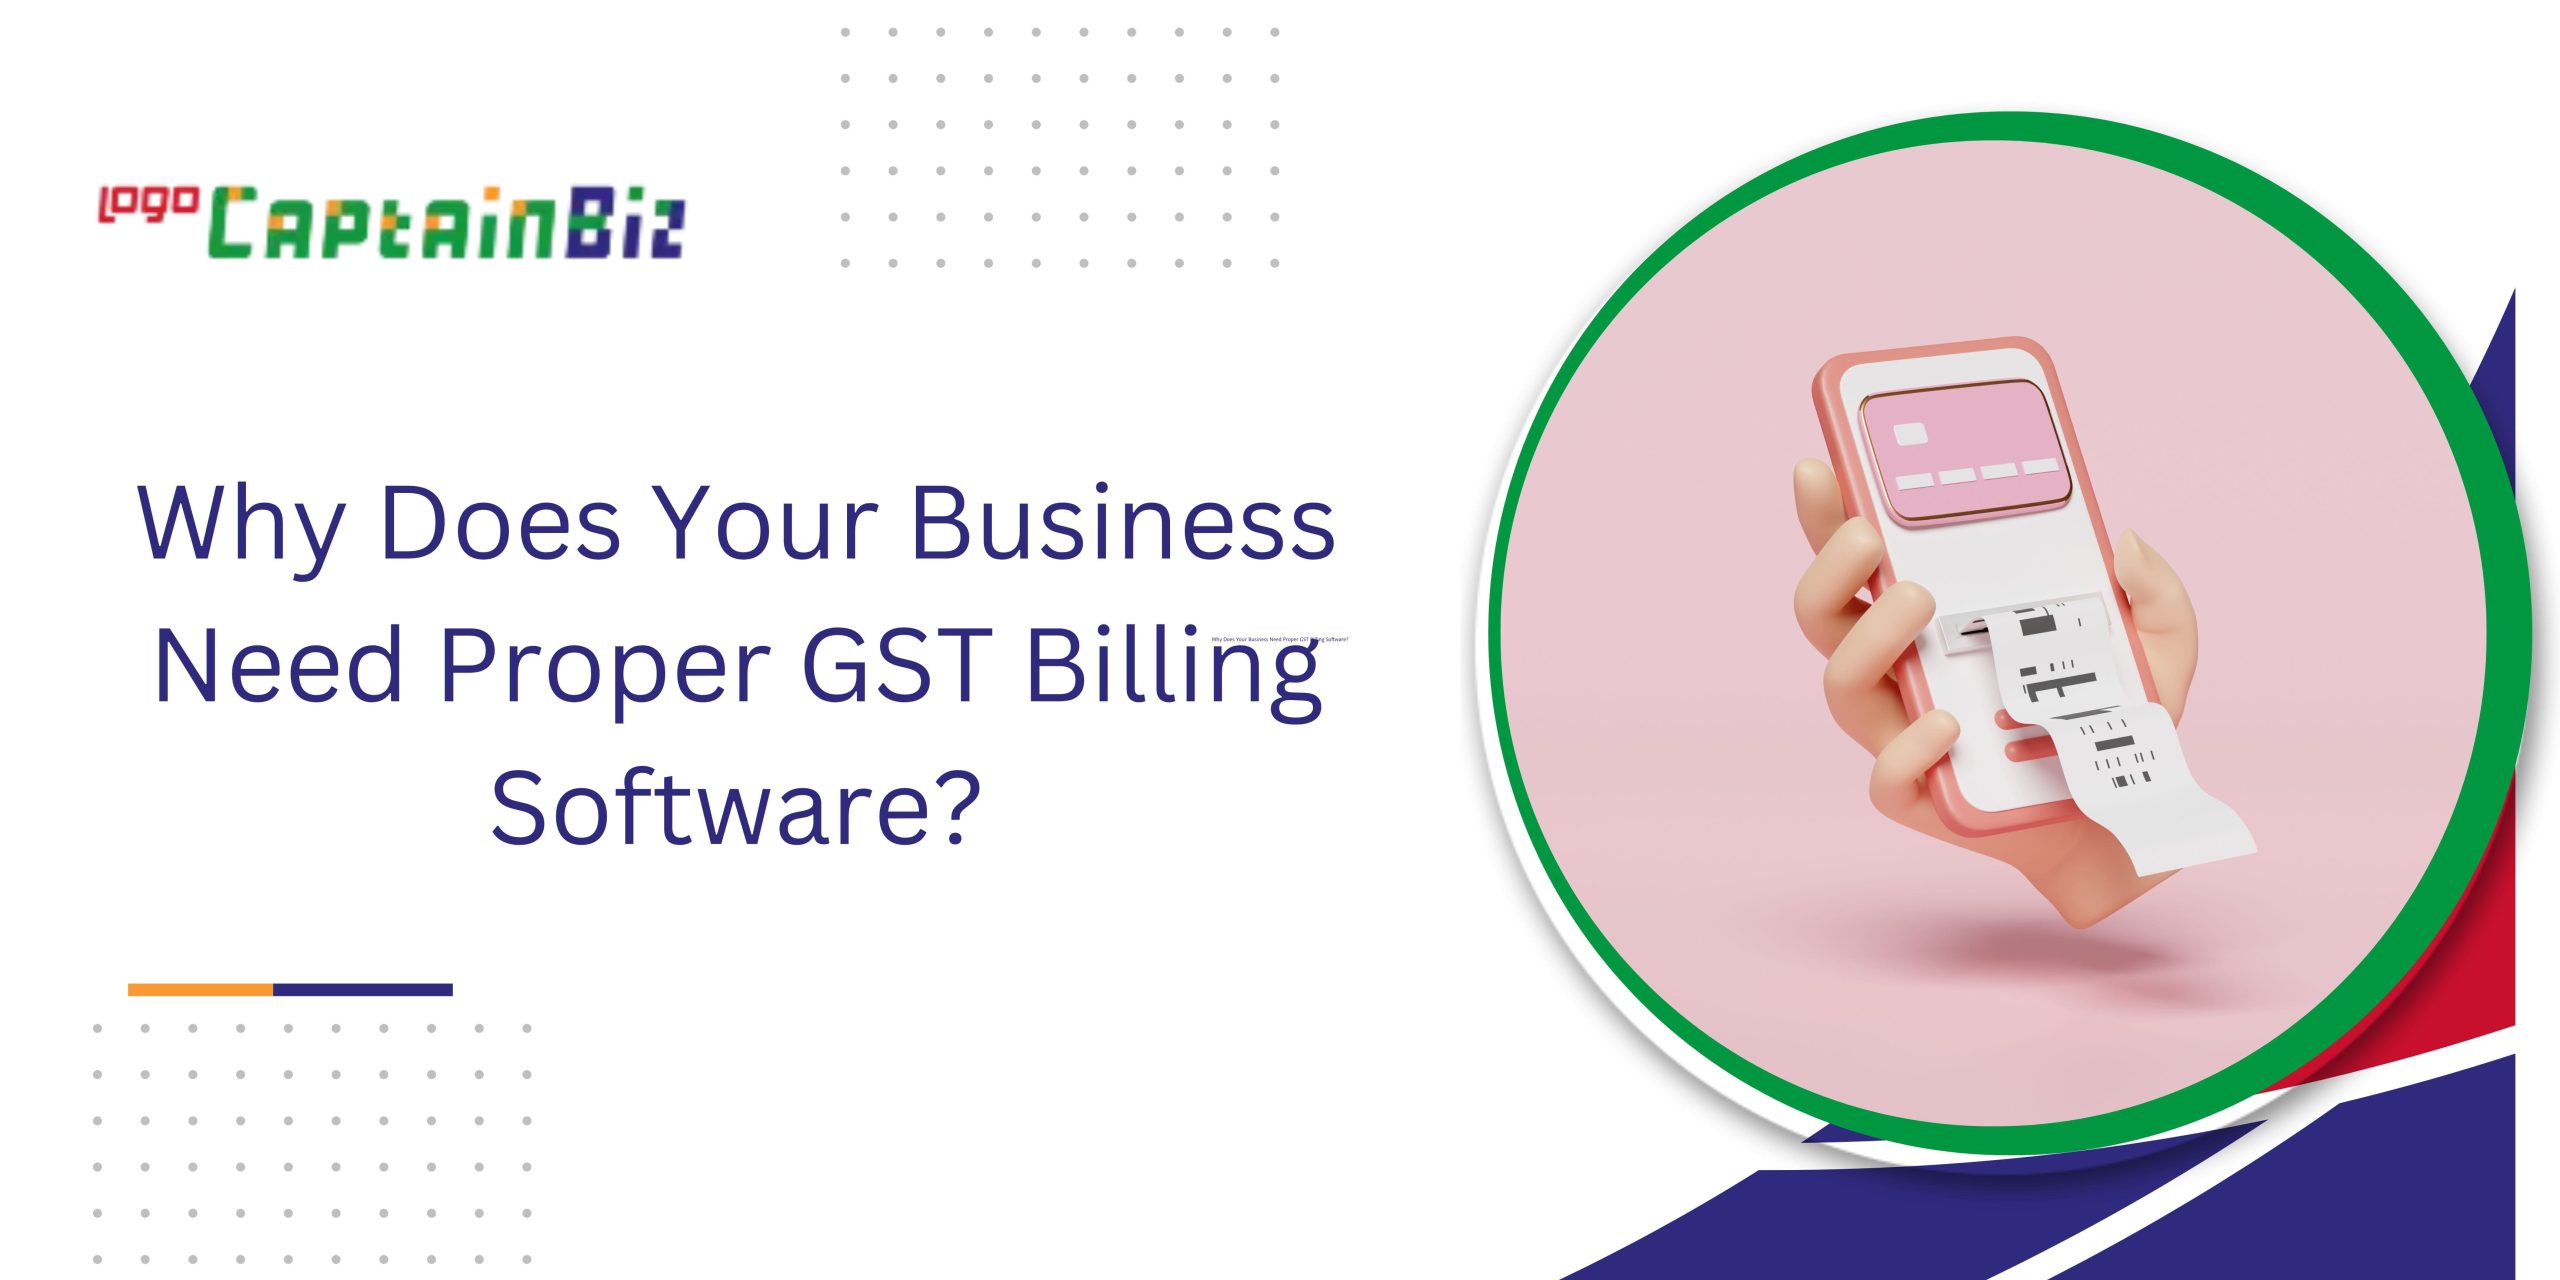 Why Does Your Business Need Proper GST Billing Software?